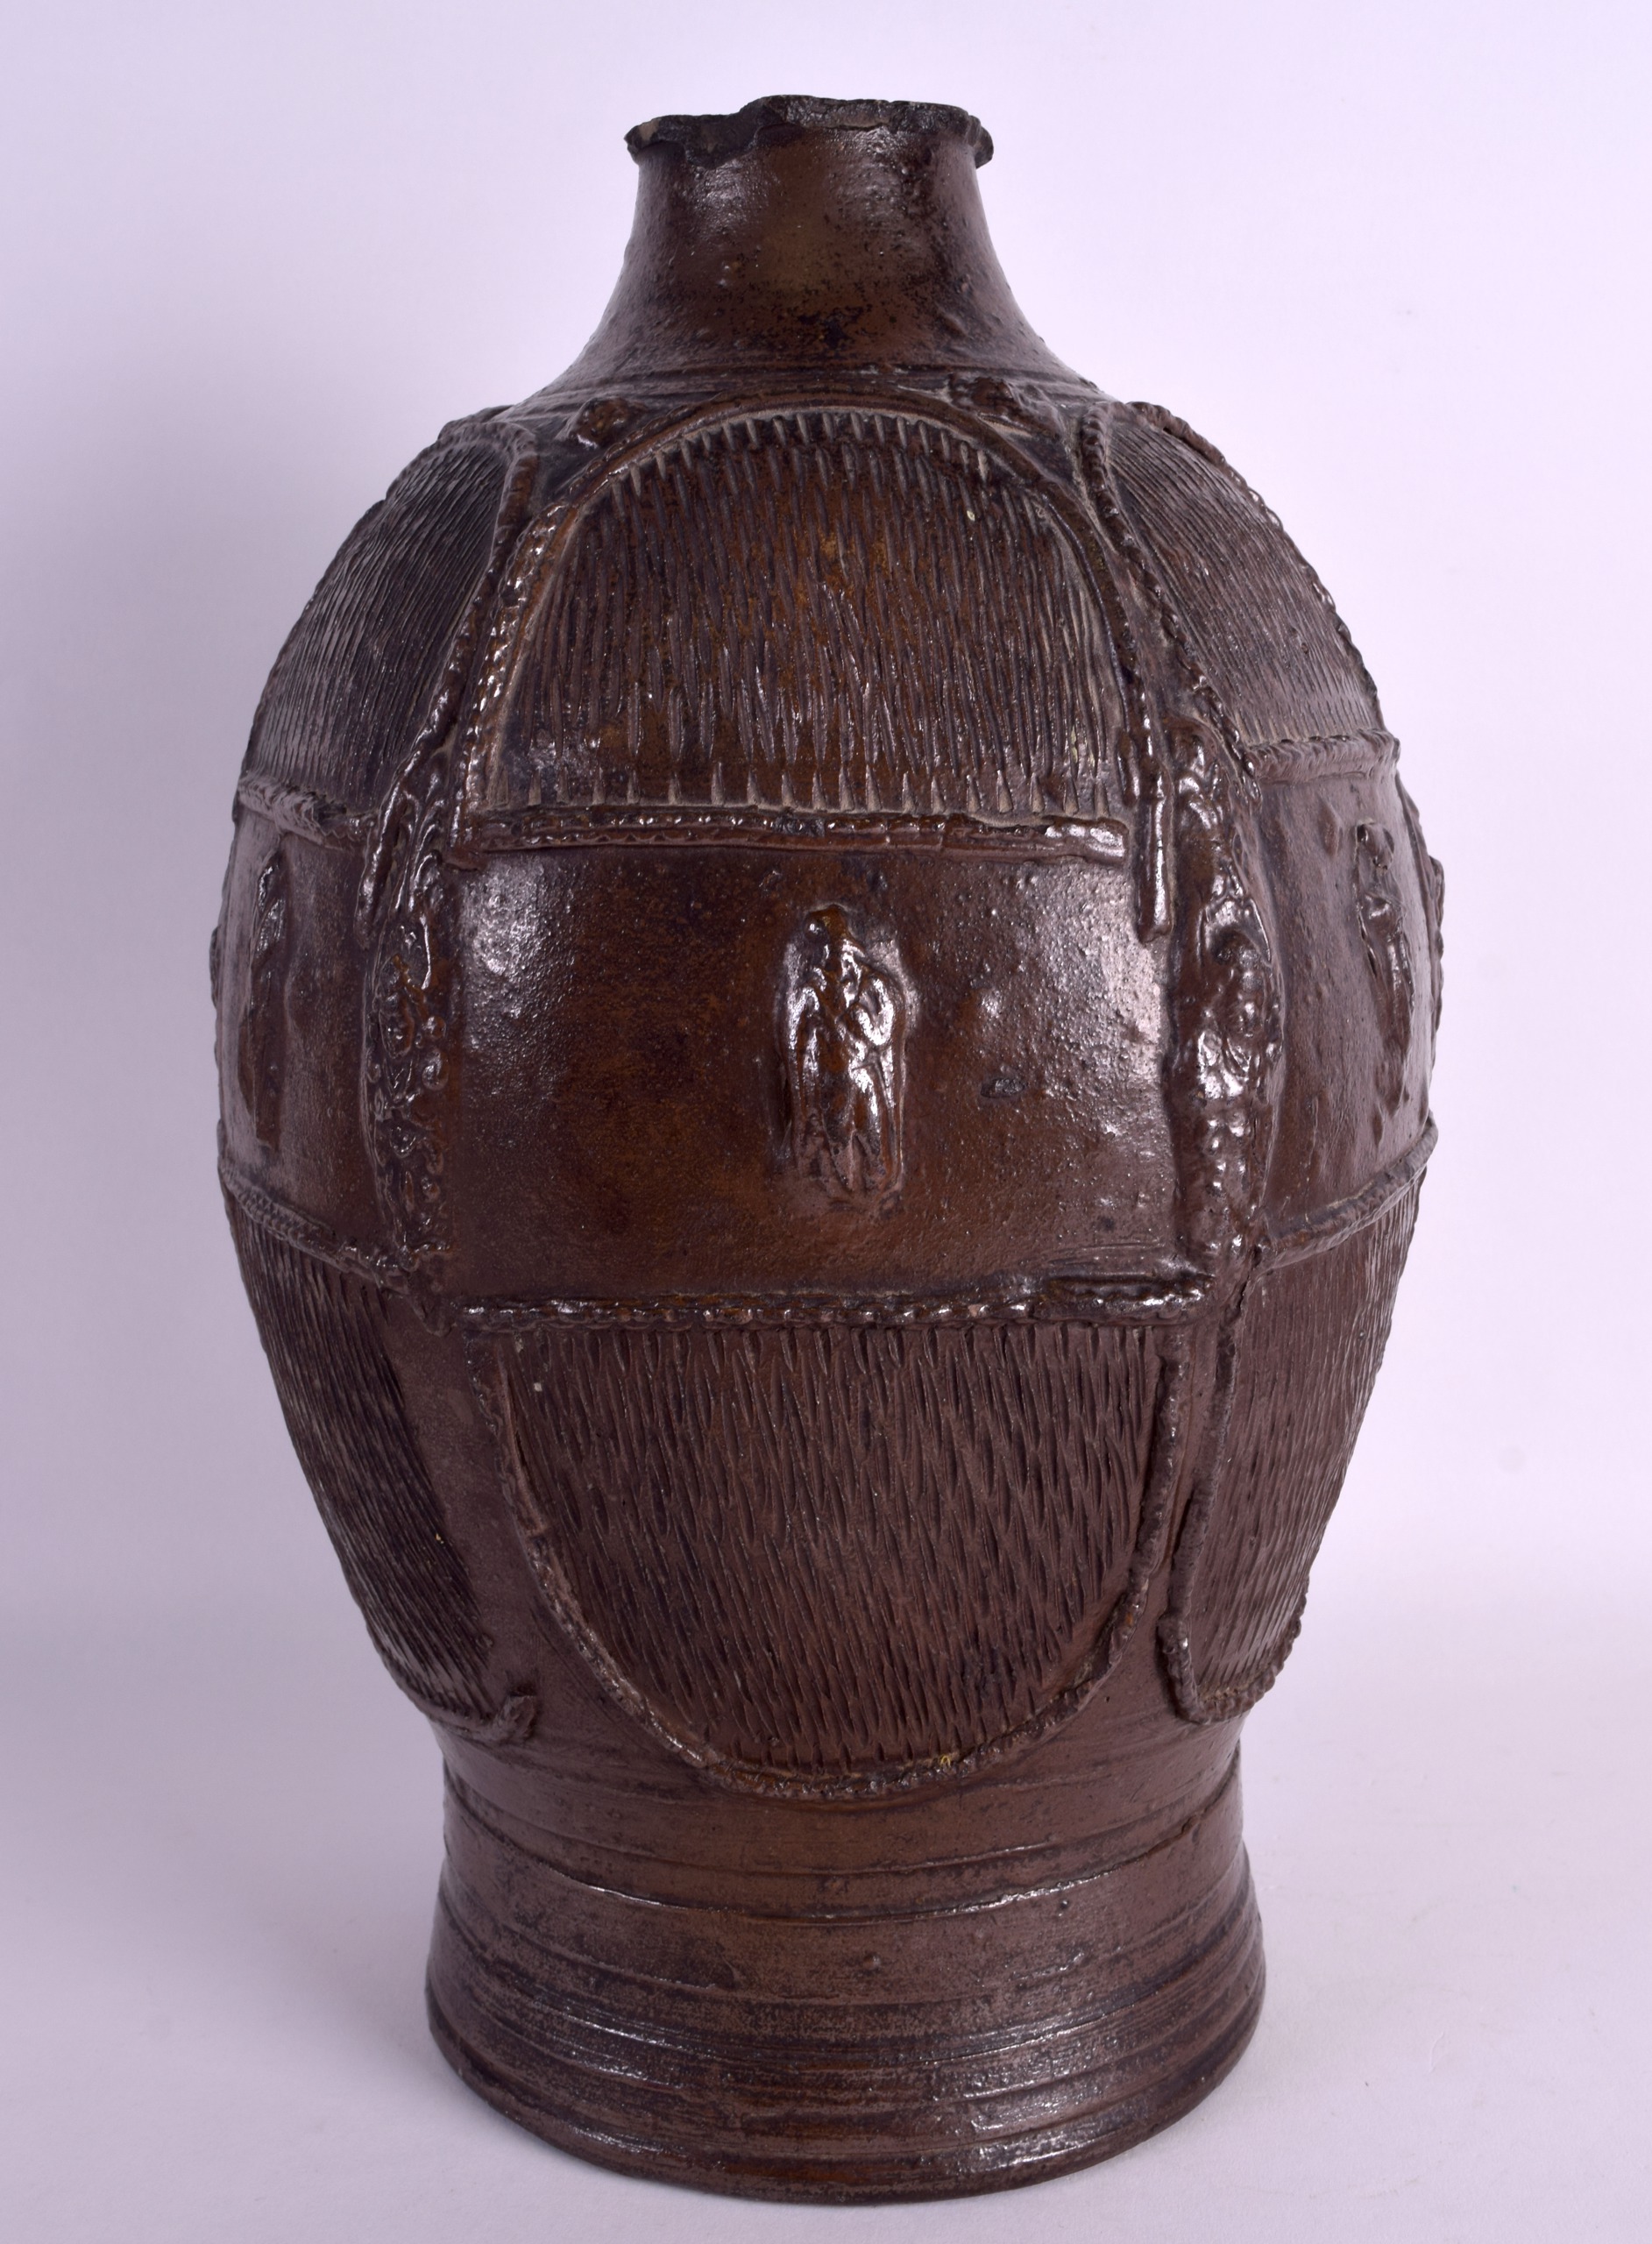 A LARGE AND RARE 17TH/18TH CENTURY GERMAN STONEWARE VESSEL decorated in relief with figures and - Image 2 of 4